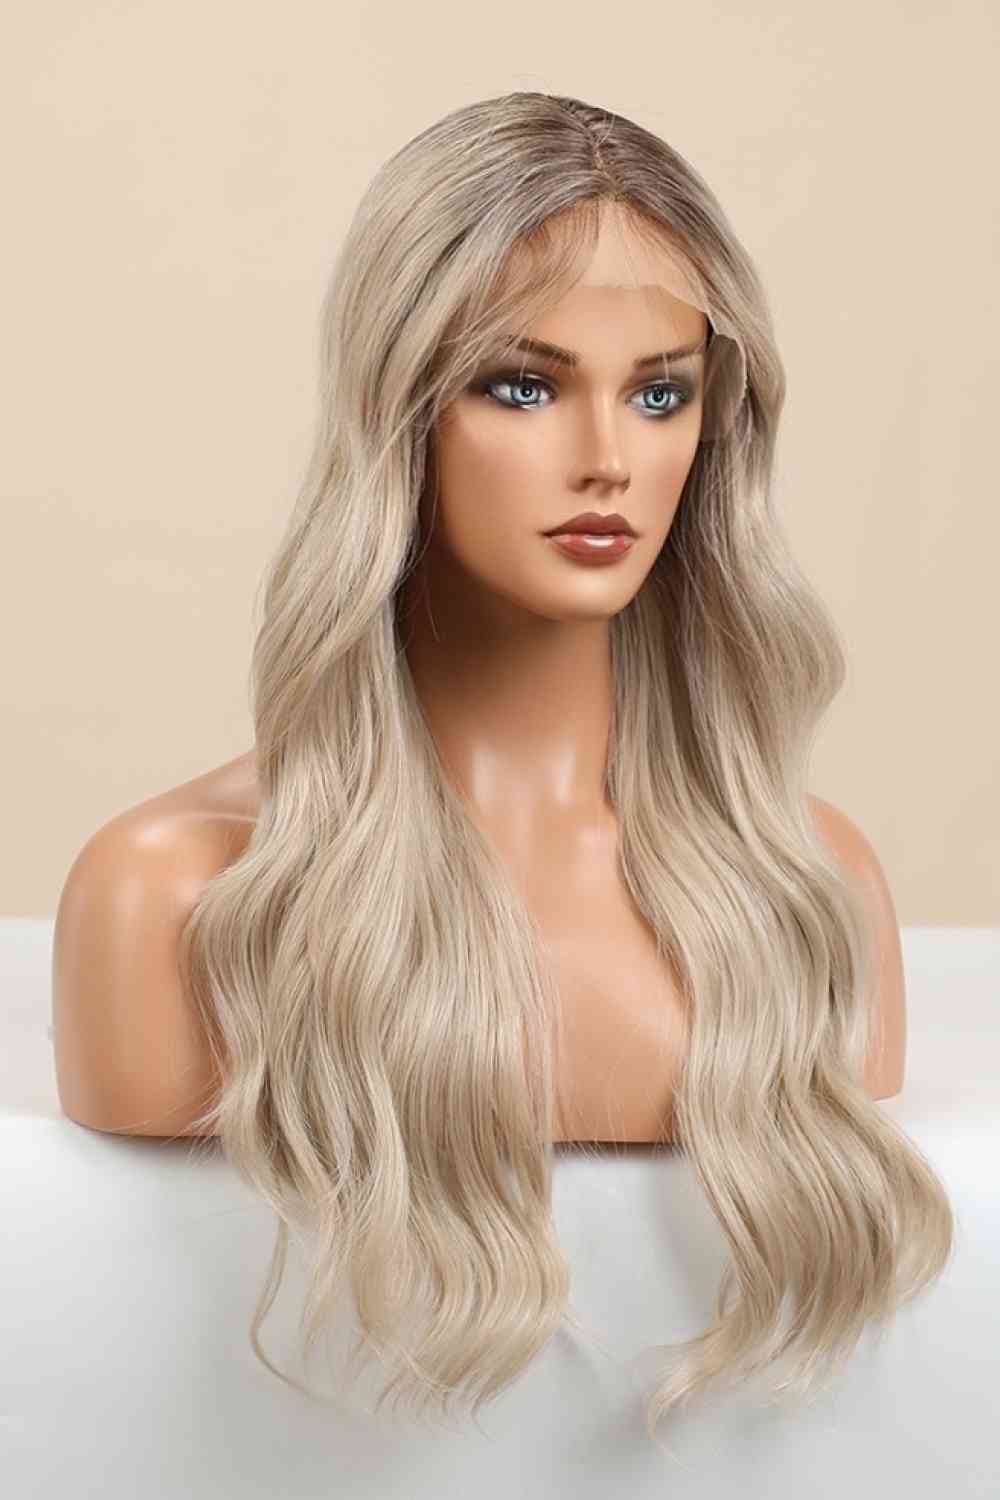 TEEK - Gold 13*2" Wave Lace Front 26" Synthetic Wig HAIR TEEK Trend   